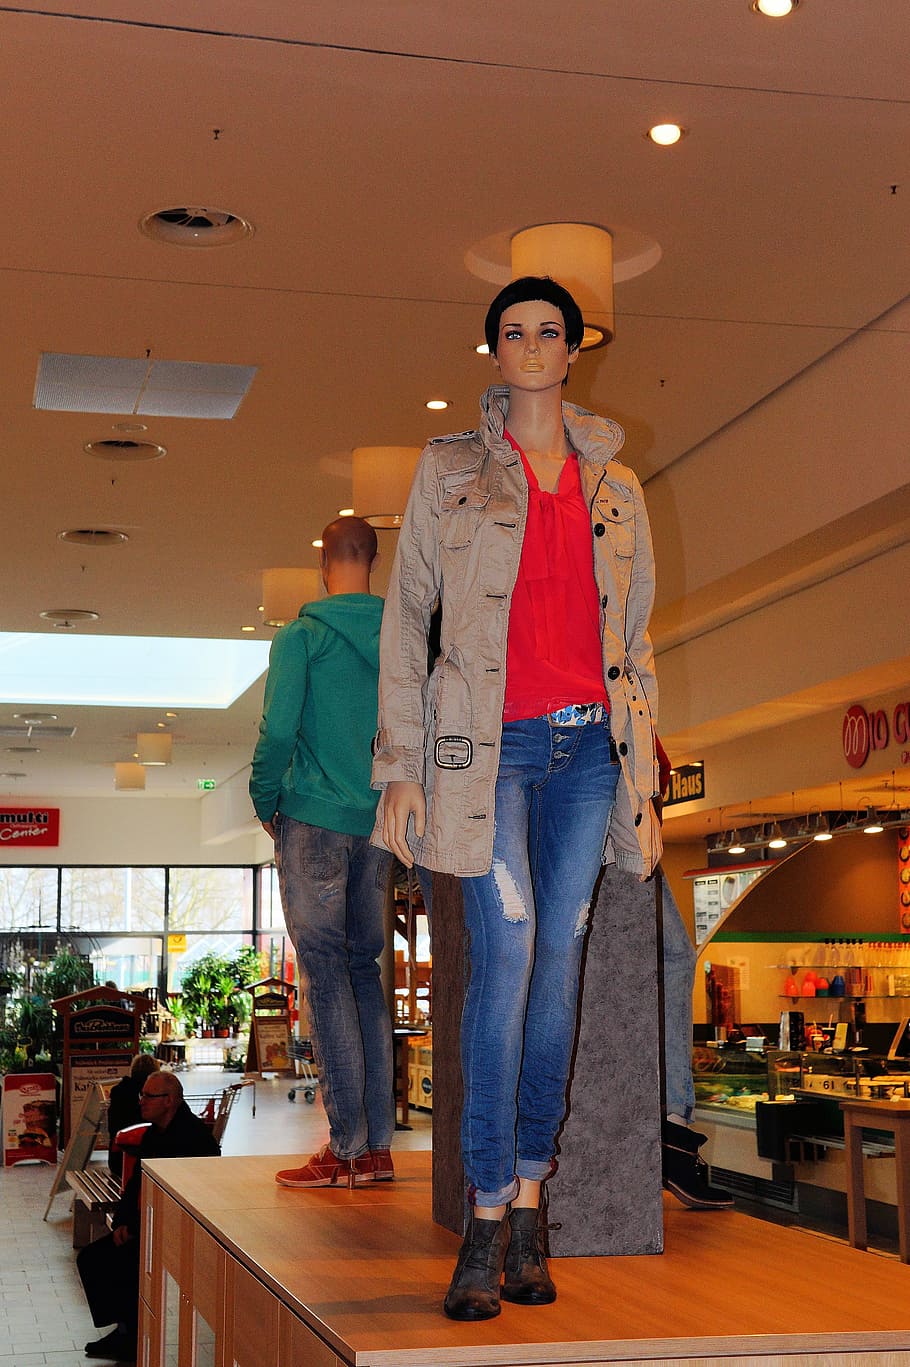 display dummy, fashion, jeans, pants, clothing, fashionable, fashion industry, shopping centre, standing, indoors